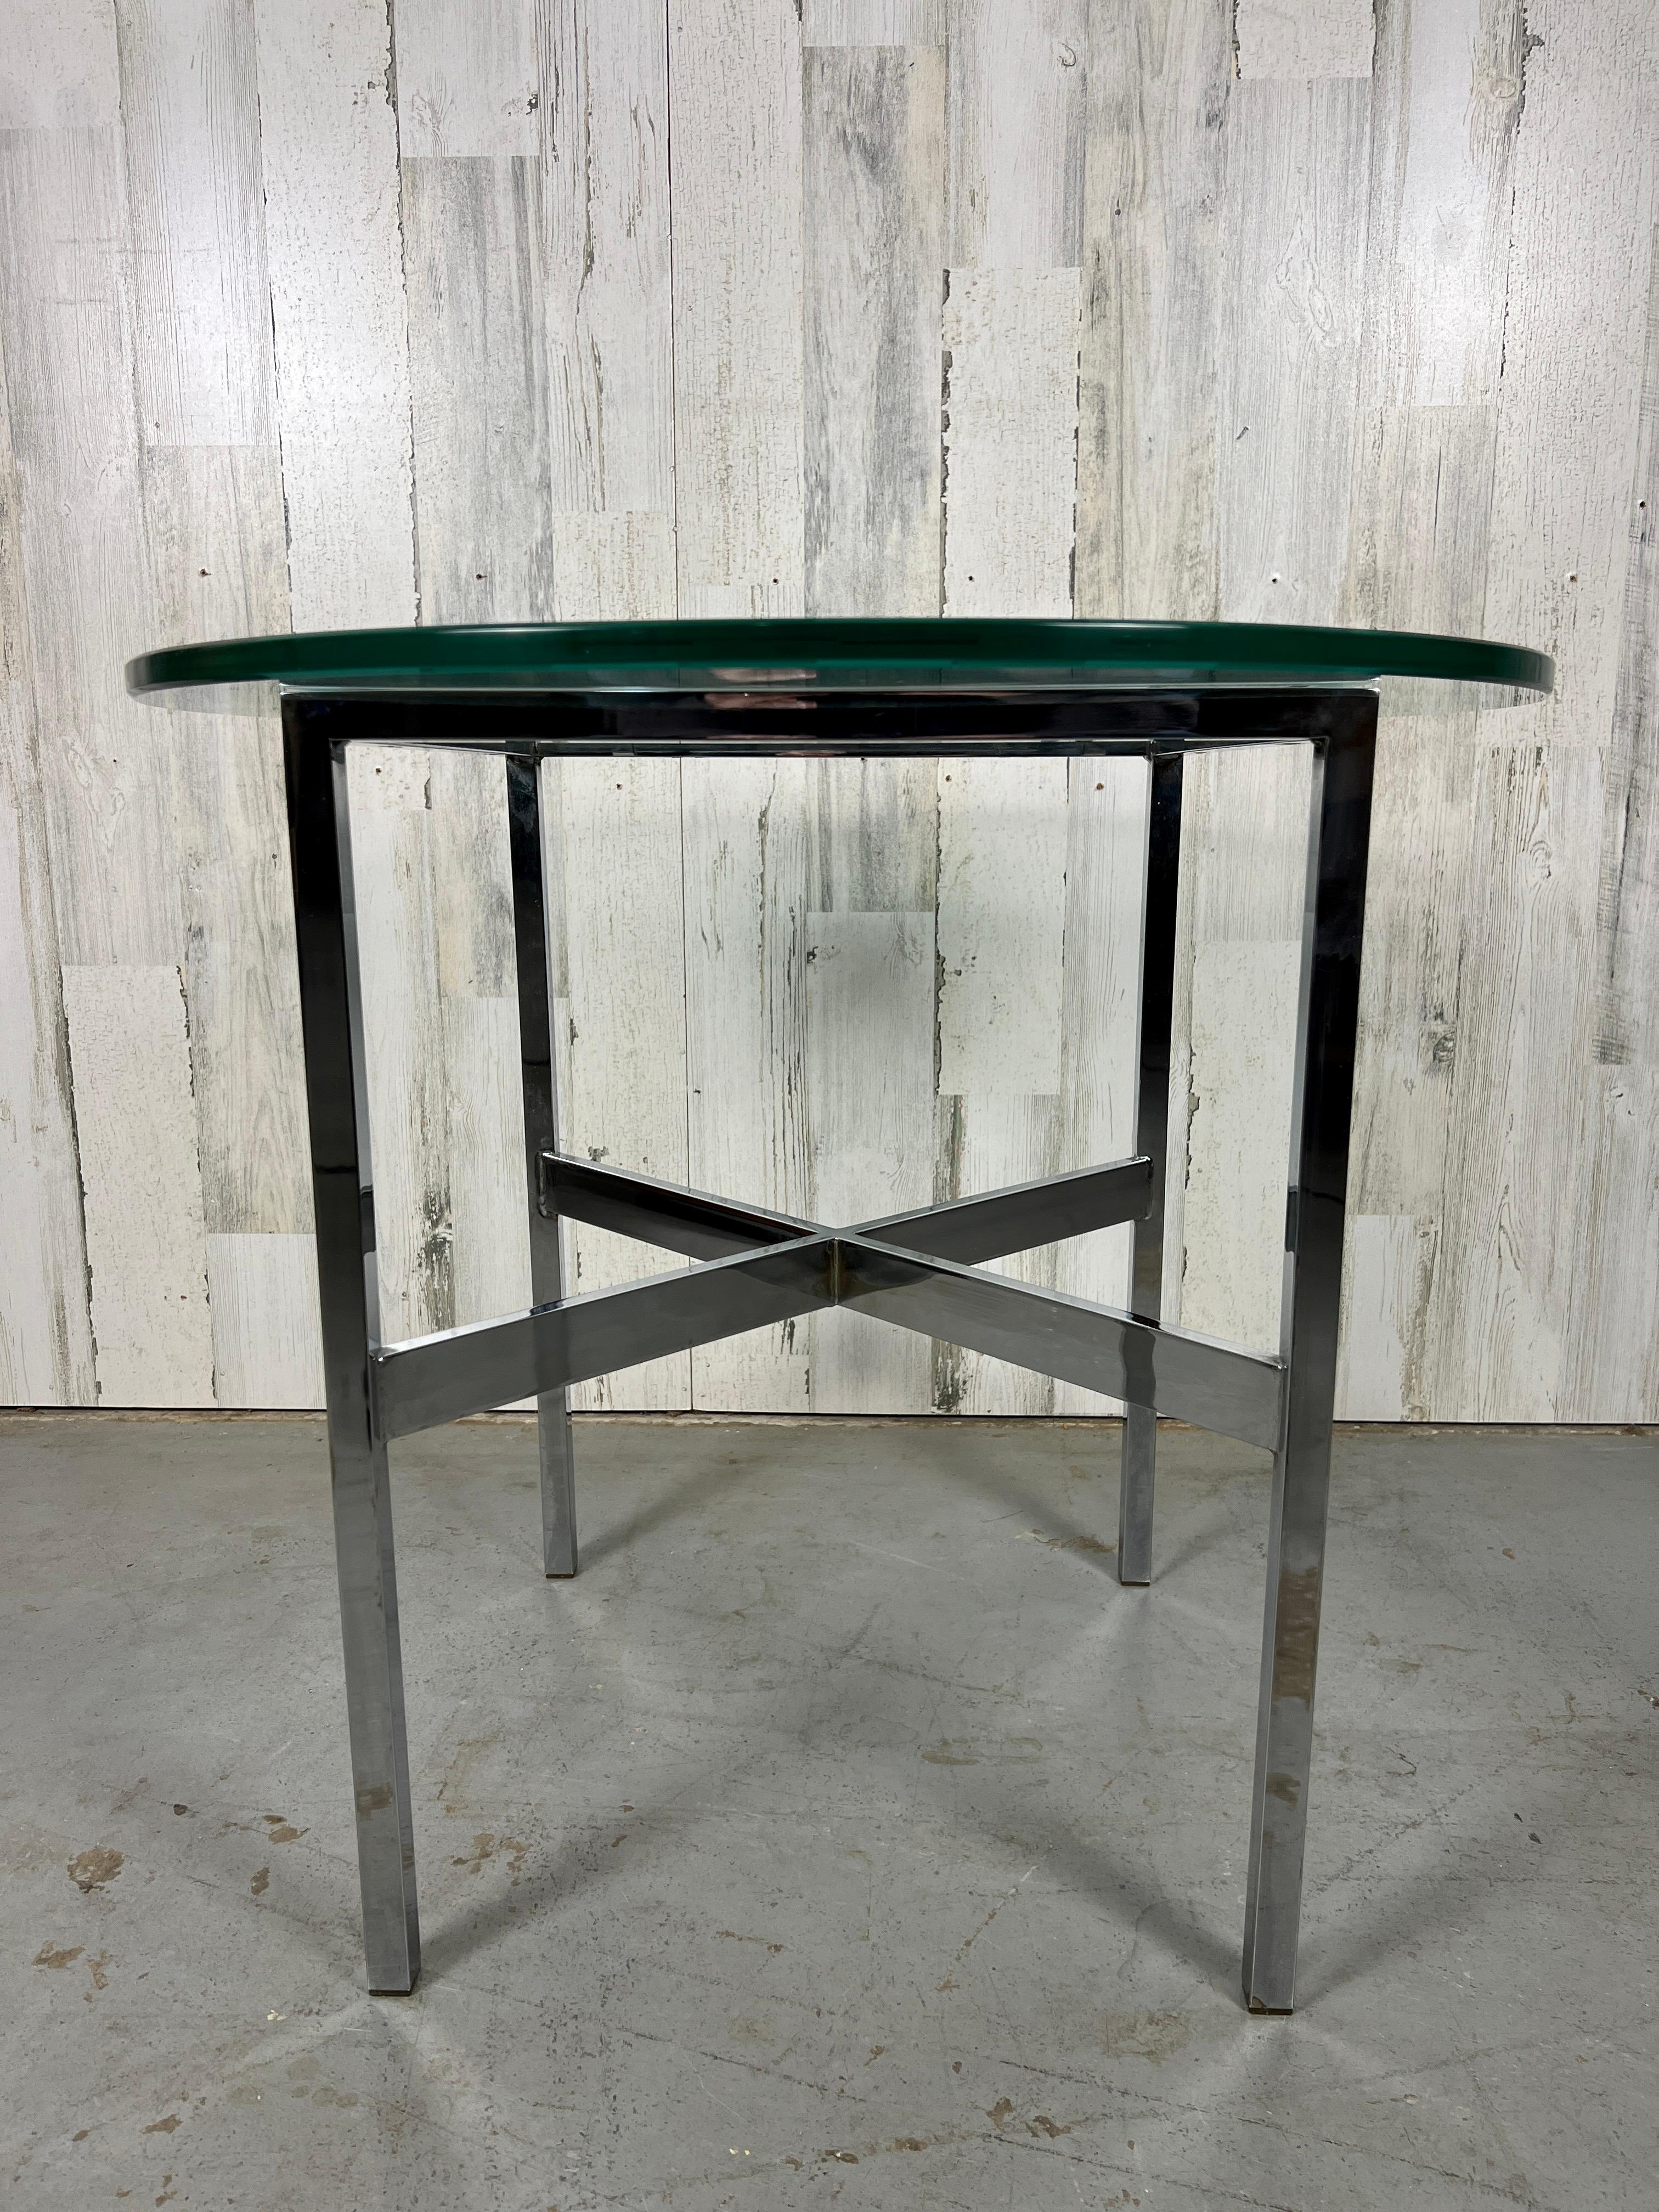 Vintage Chrome and Glass Game Table In Good Condition For Sale In Denton, TX